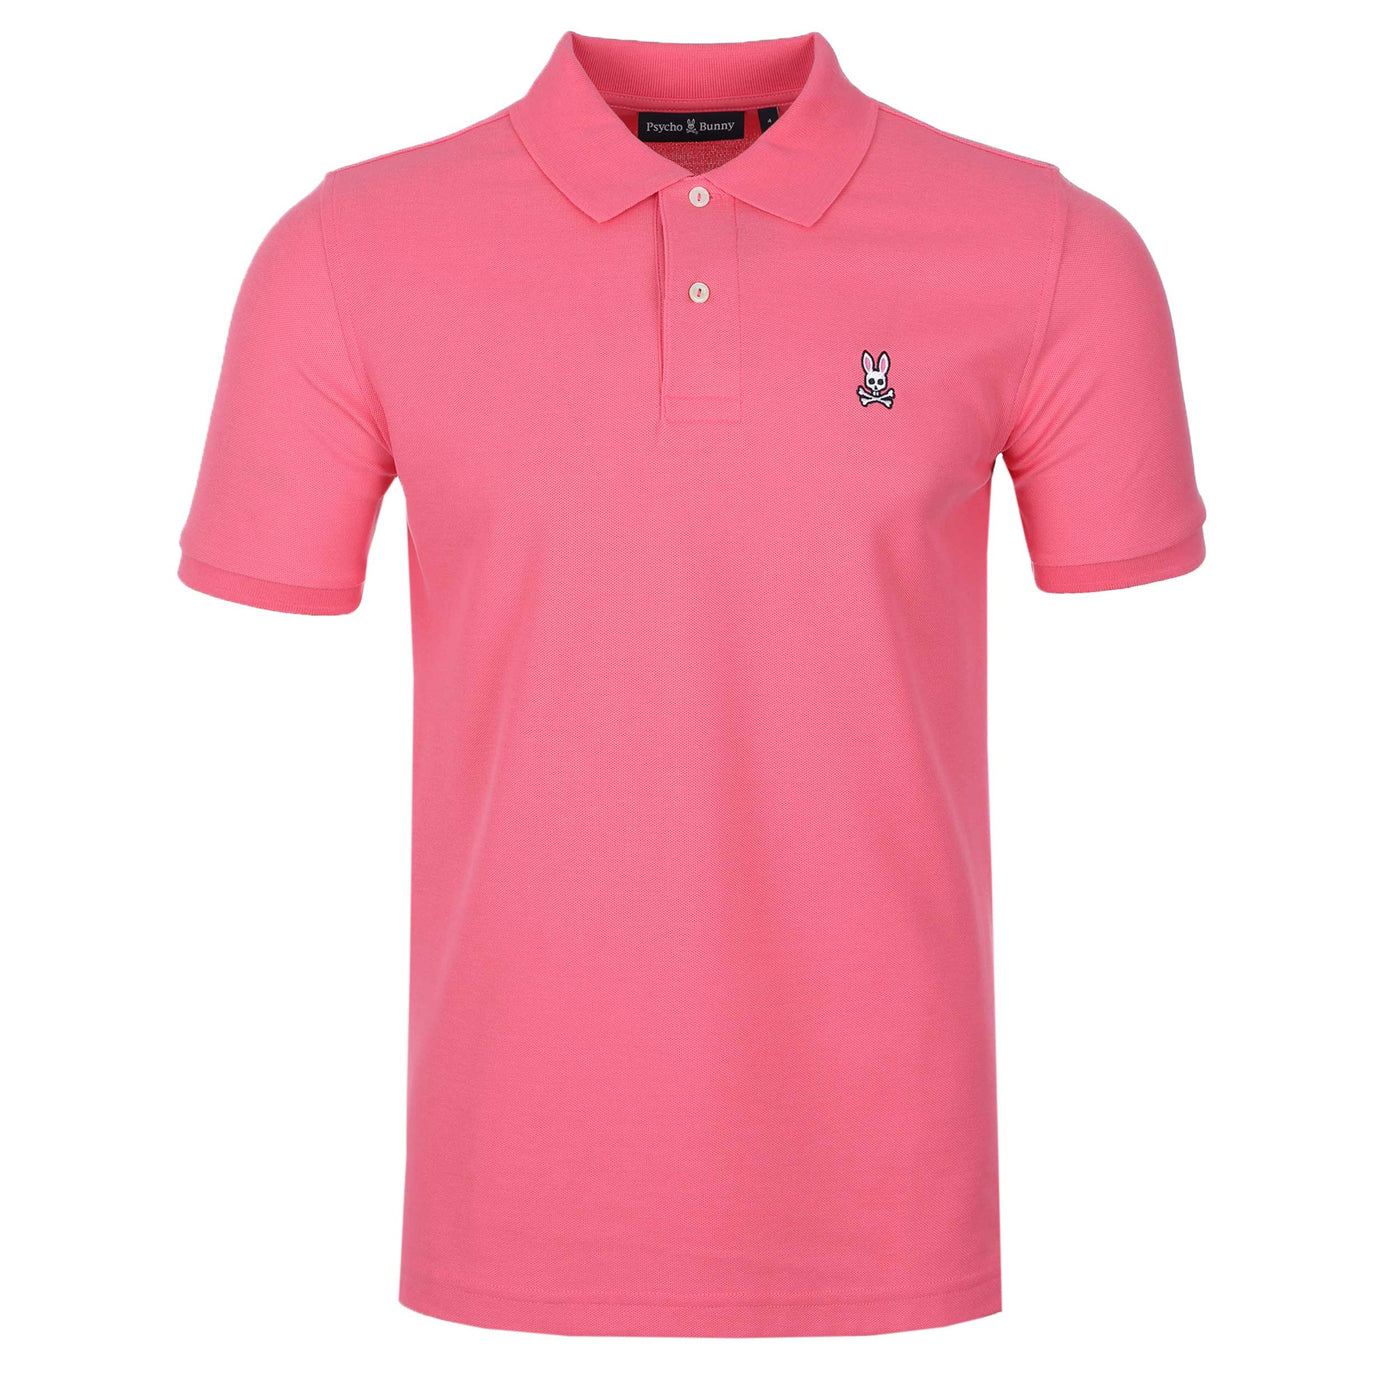 Psycho Bunny Classic Polo Shirt in Camellia Rose Pink